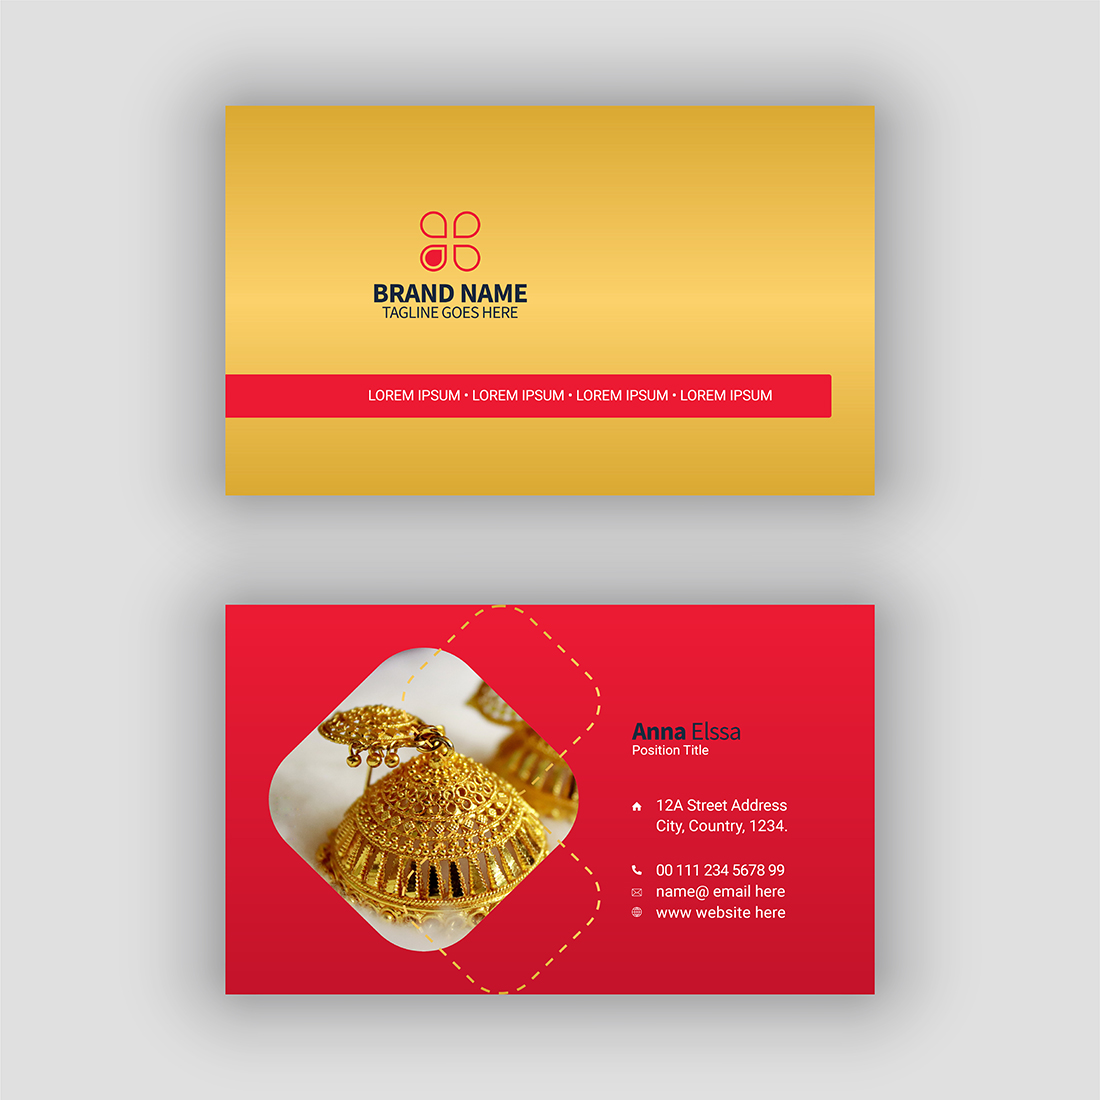 Jewelry Business Card Design Template cover image.